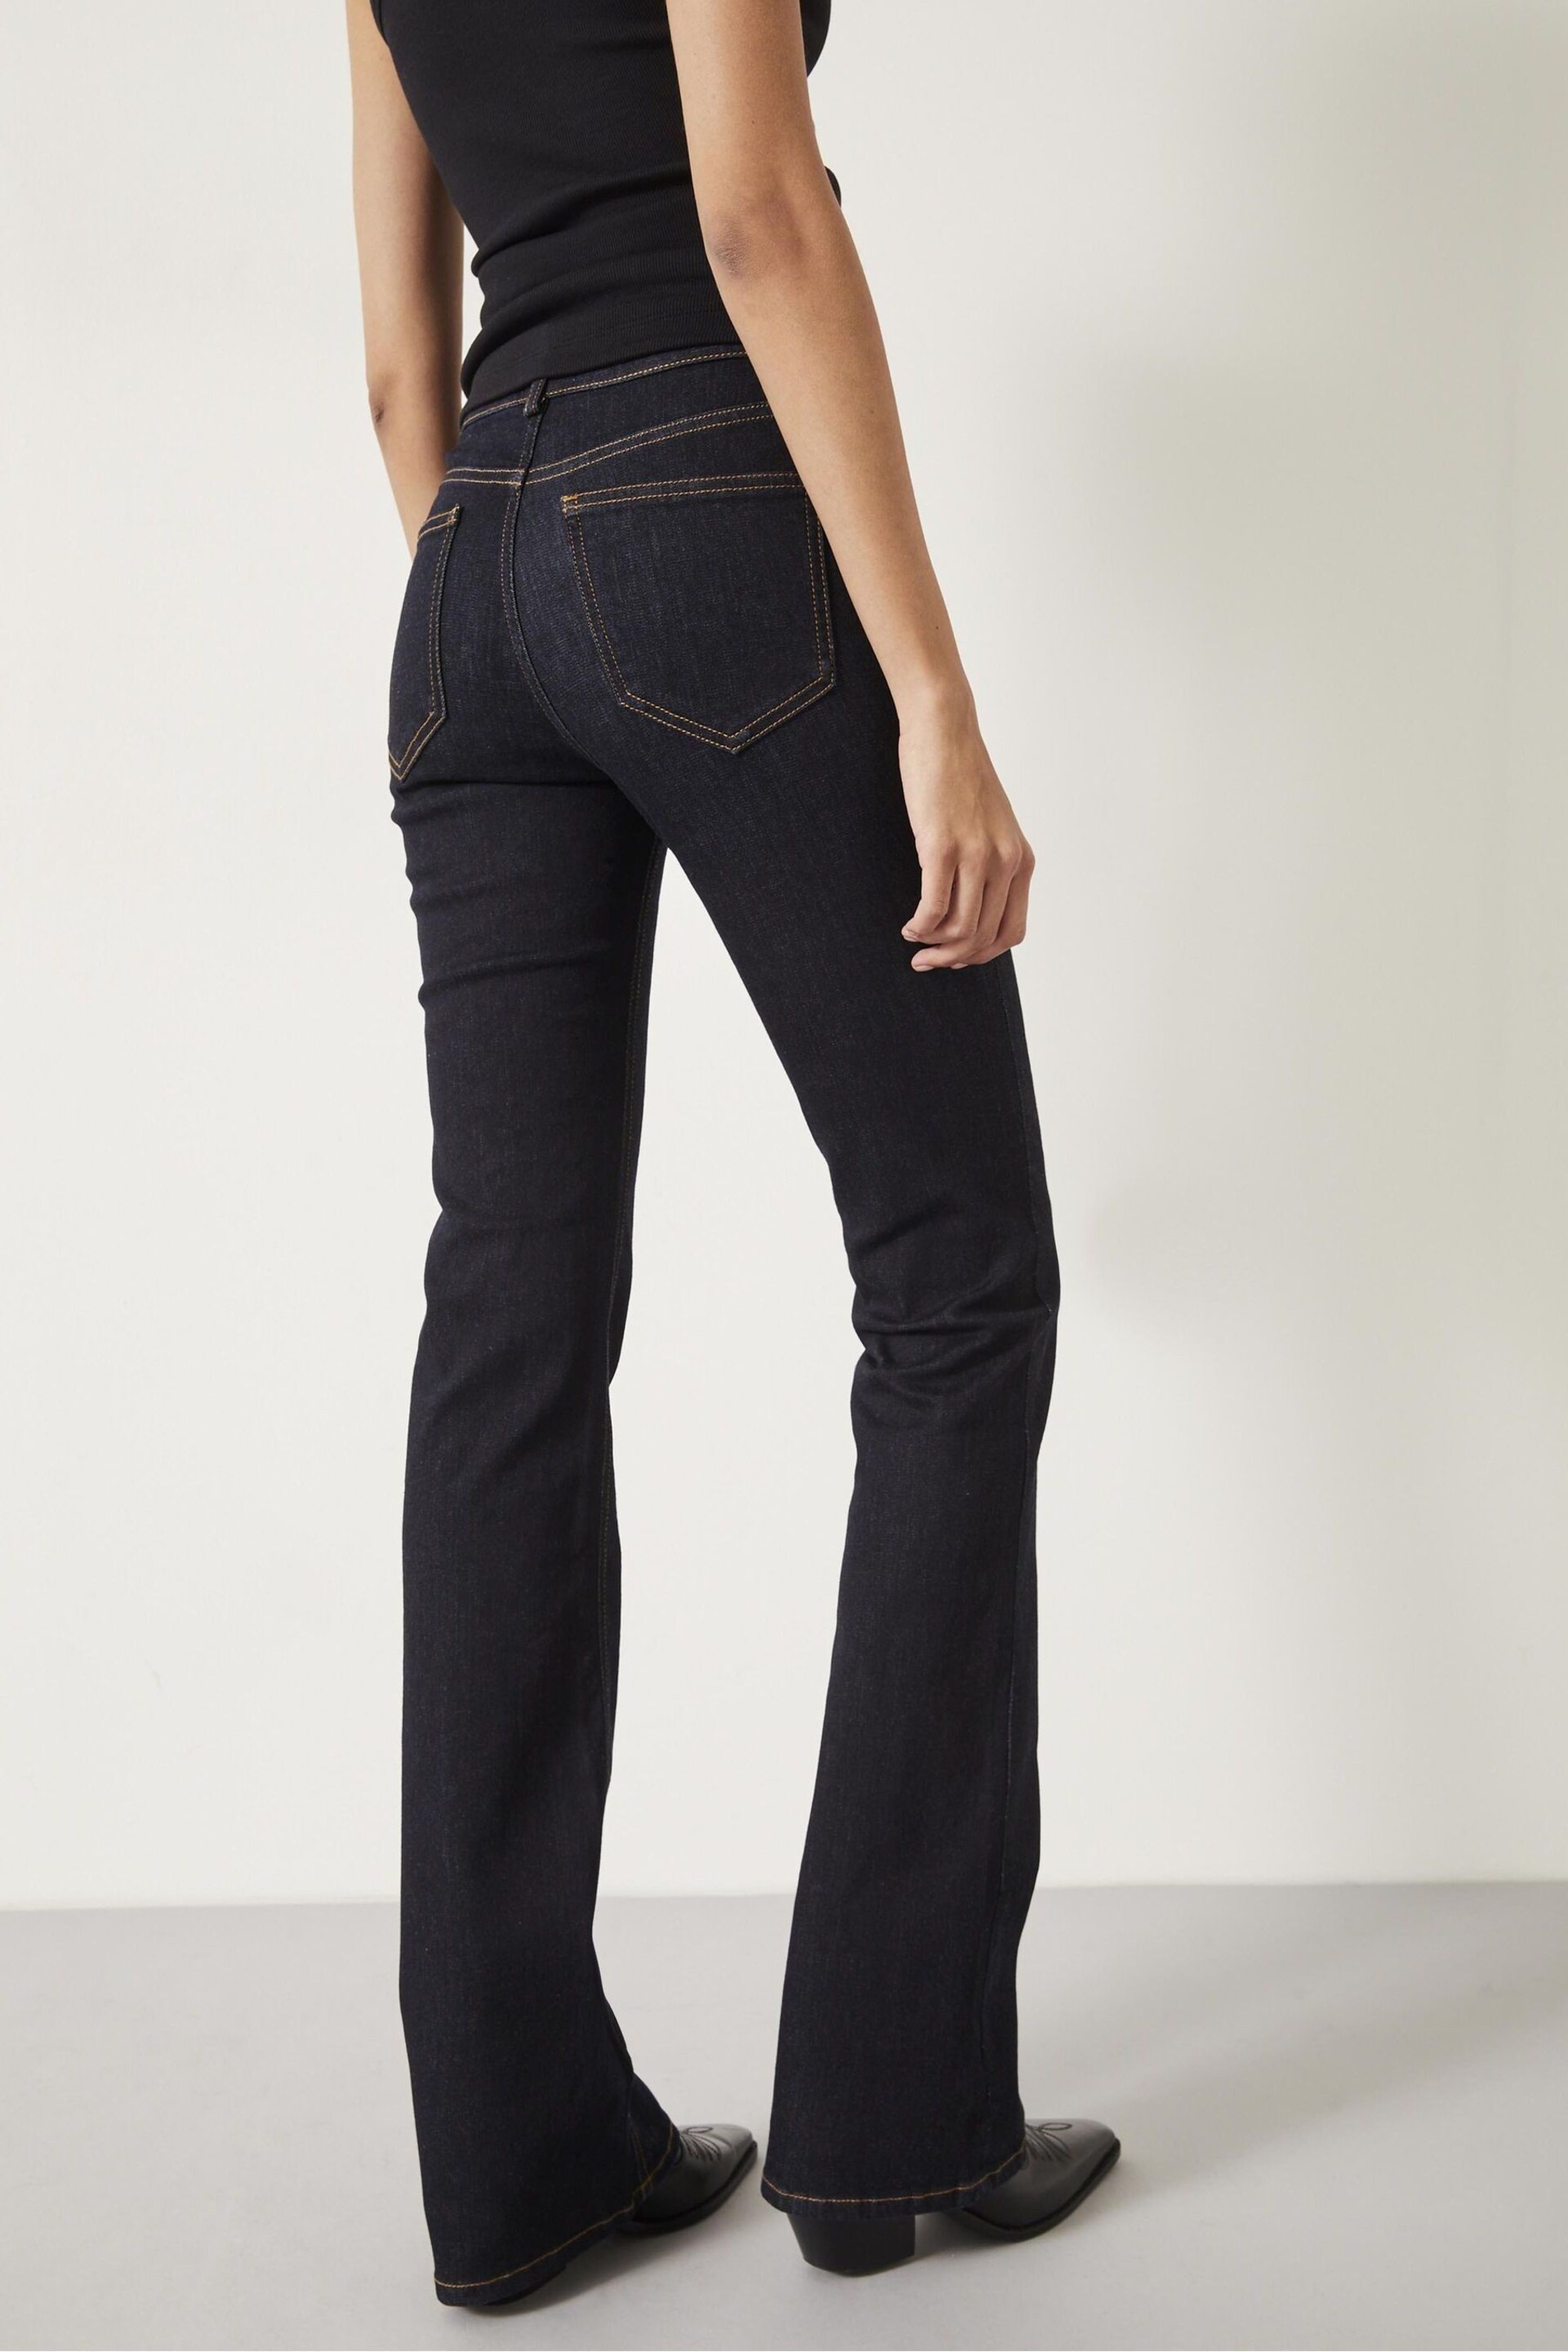 Hush Blue Lorna Bootcut Jeans - Image 2 of 5